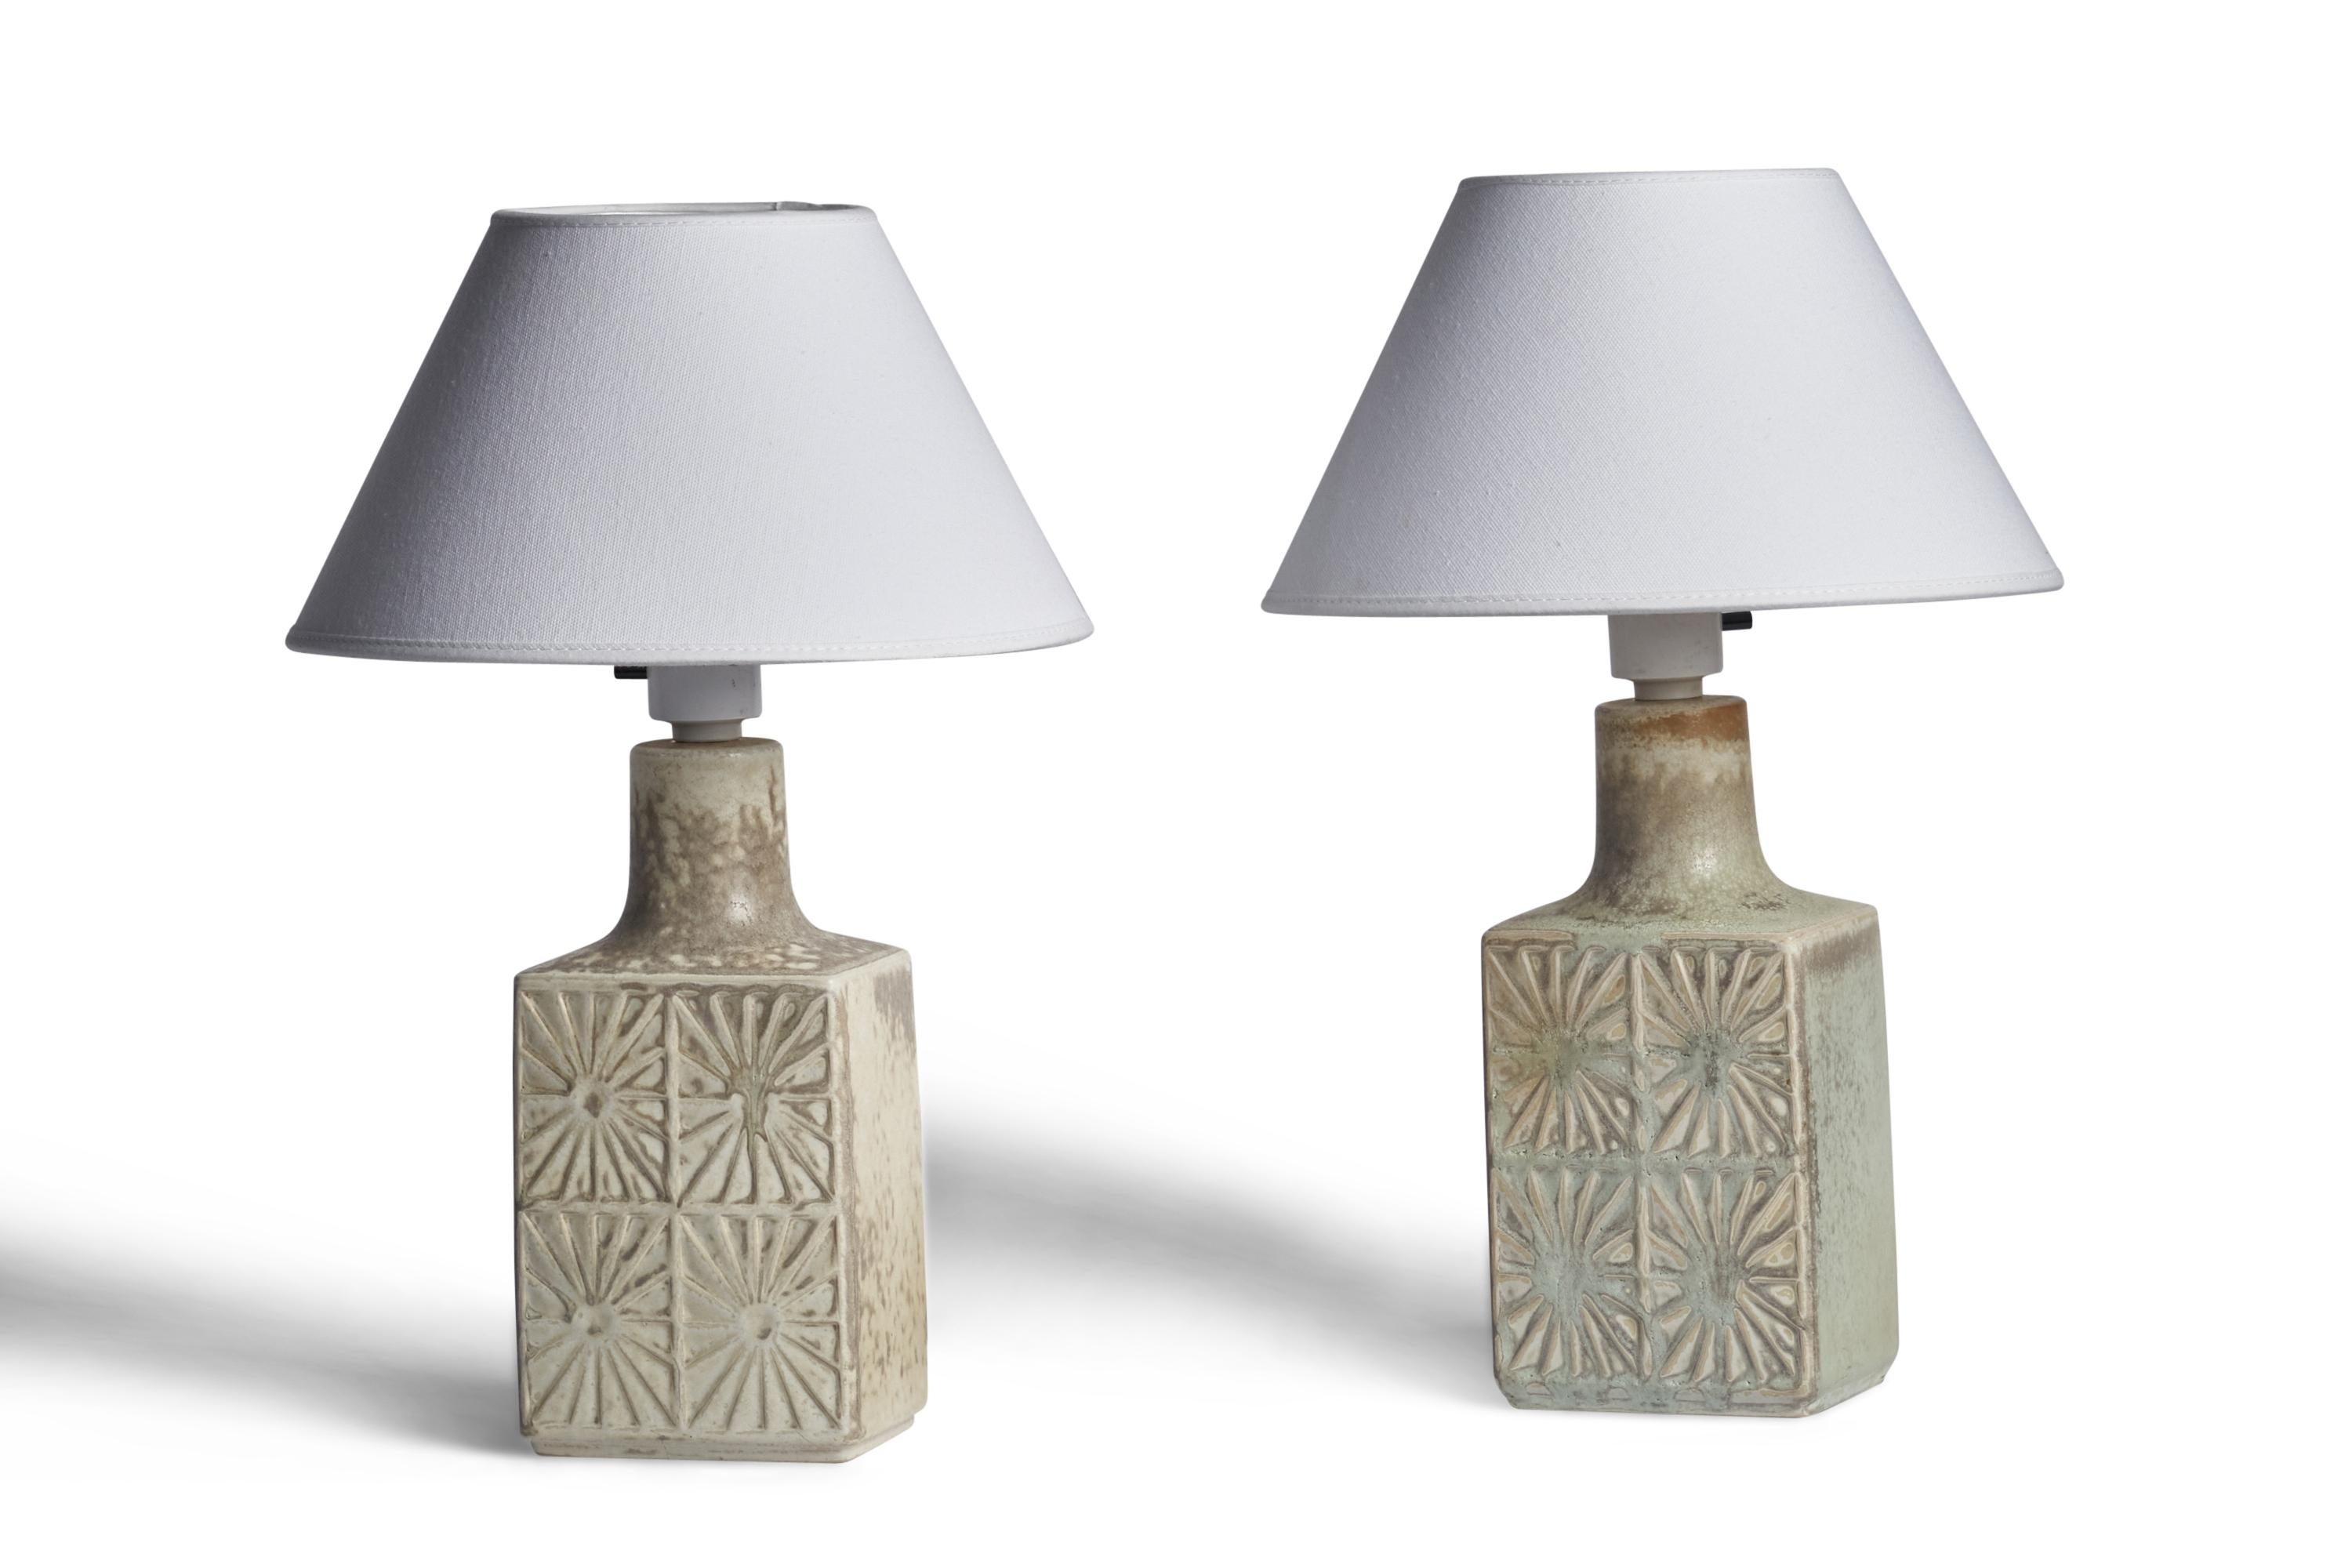 A pair of light-grey glazed table lamps designed and produced by Desiree, Denmark, 1960s.

Dimensions of Lamp (inches): 11.25